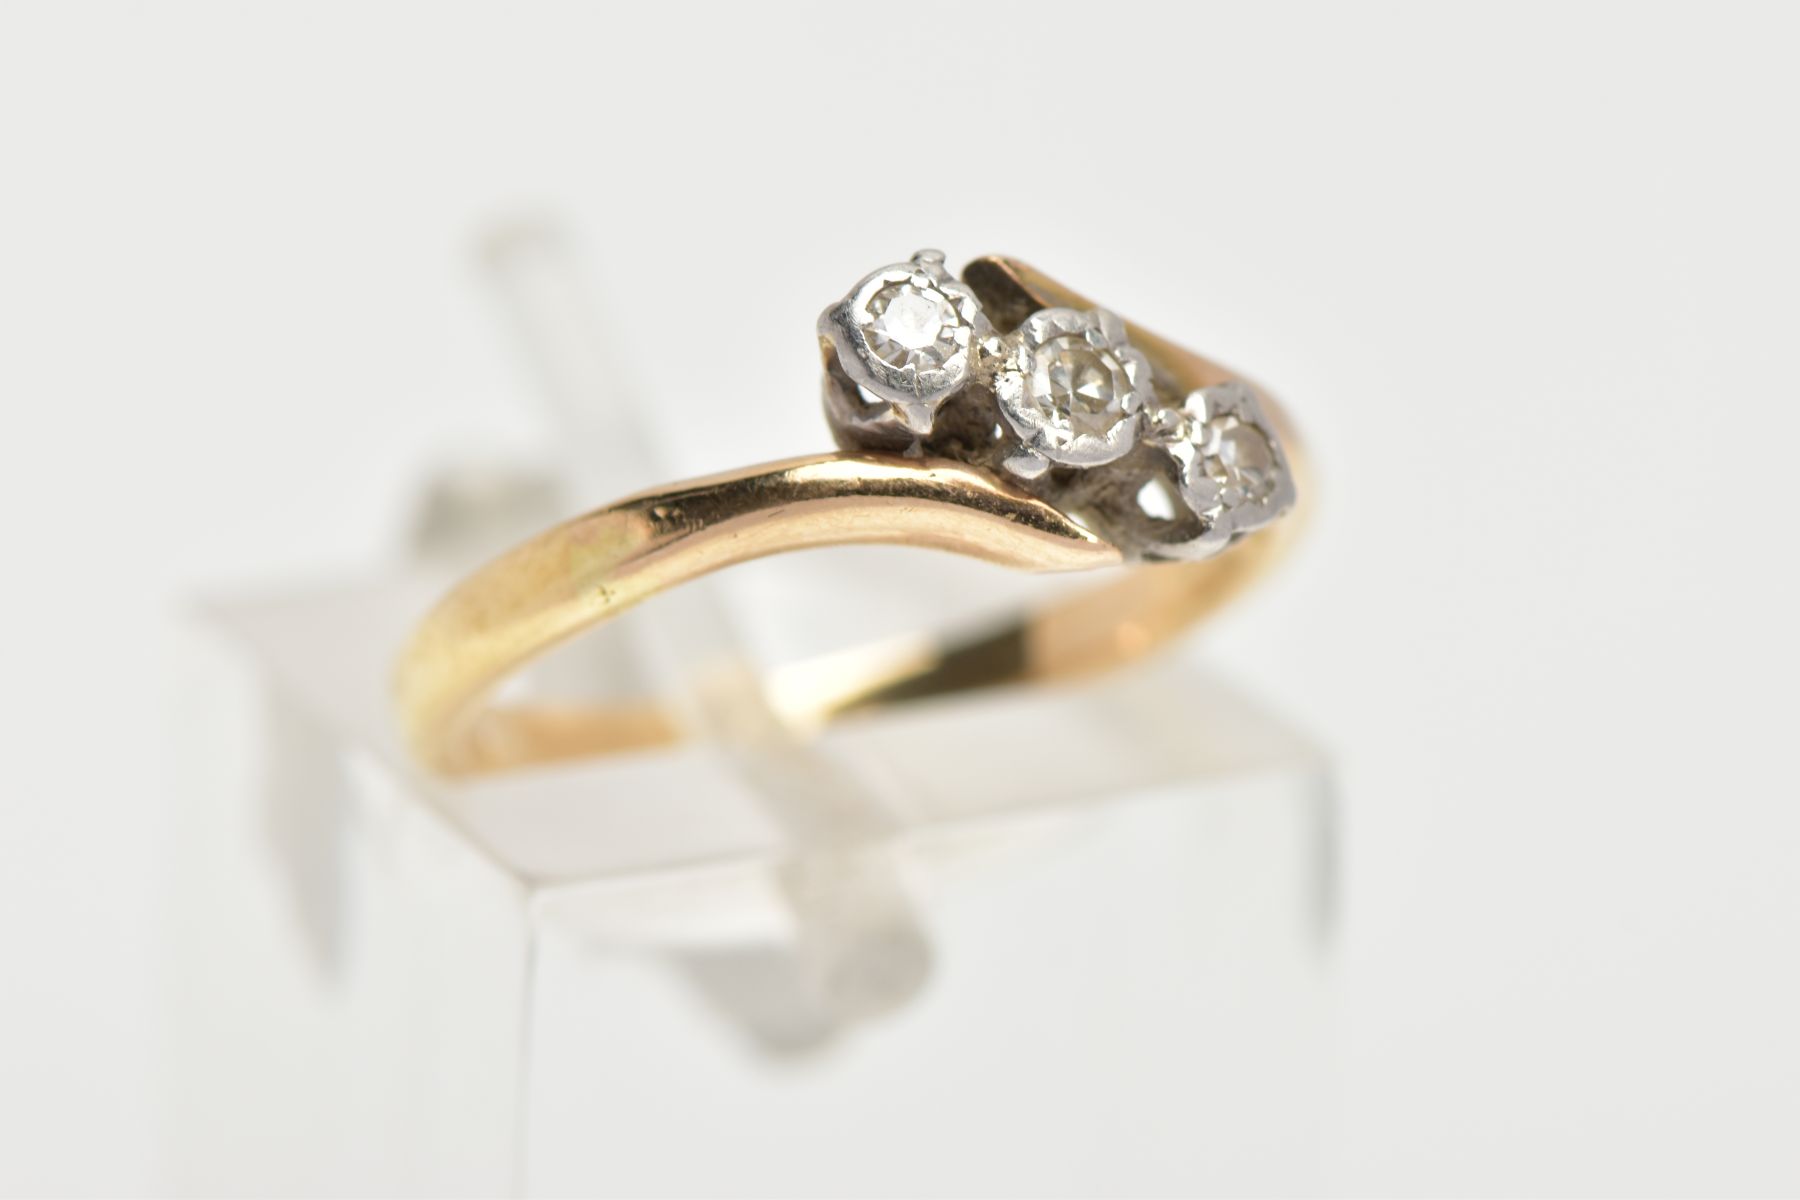 A THREE STONE DIAMOND RING, three round brilliant cut diamonds in a white metal setting, with a - Image 4 of 4